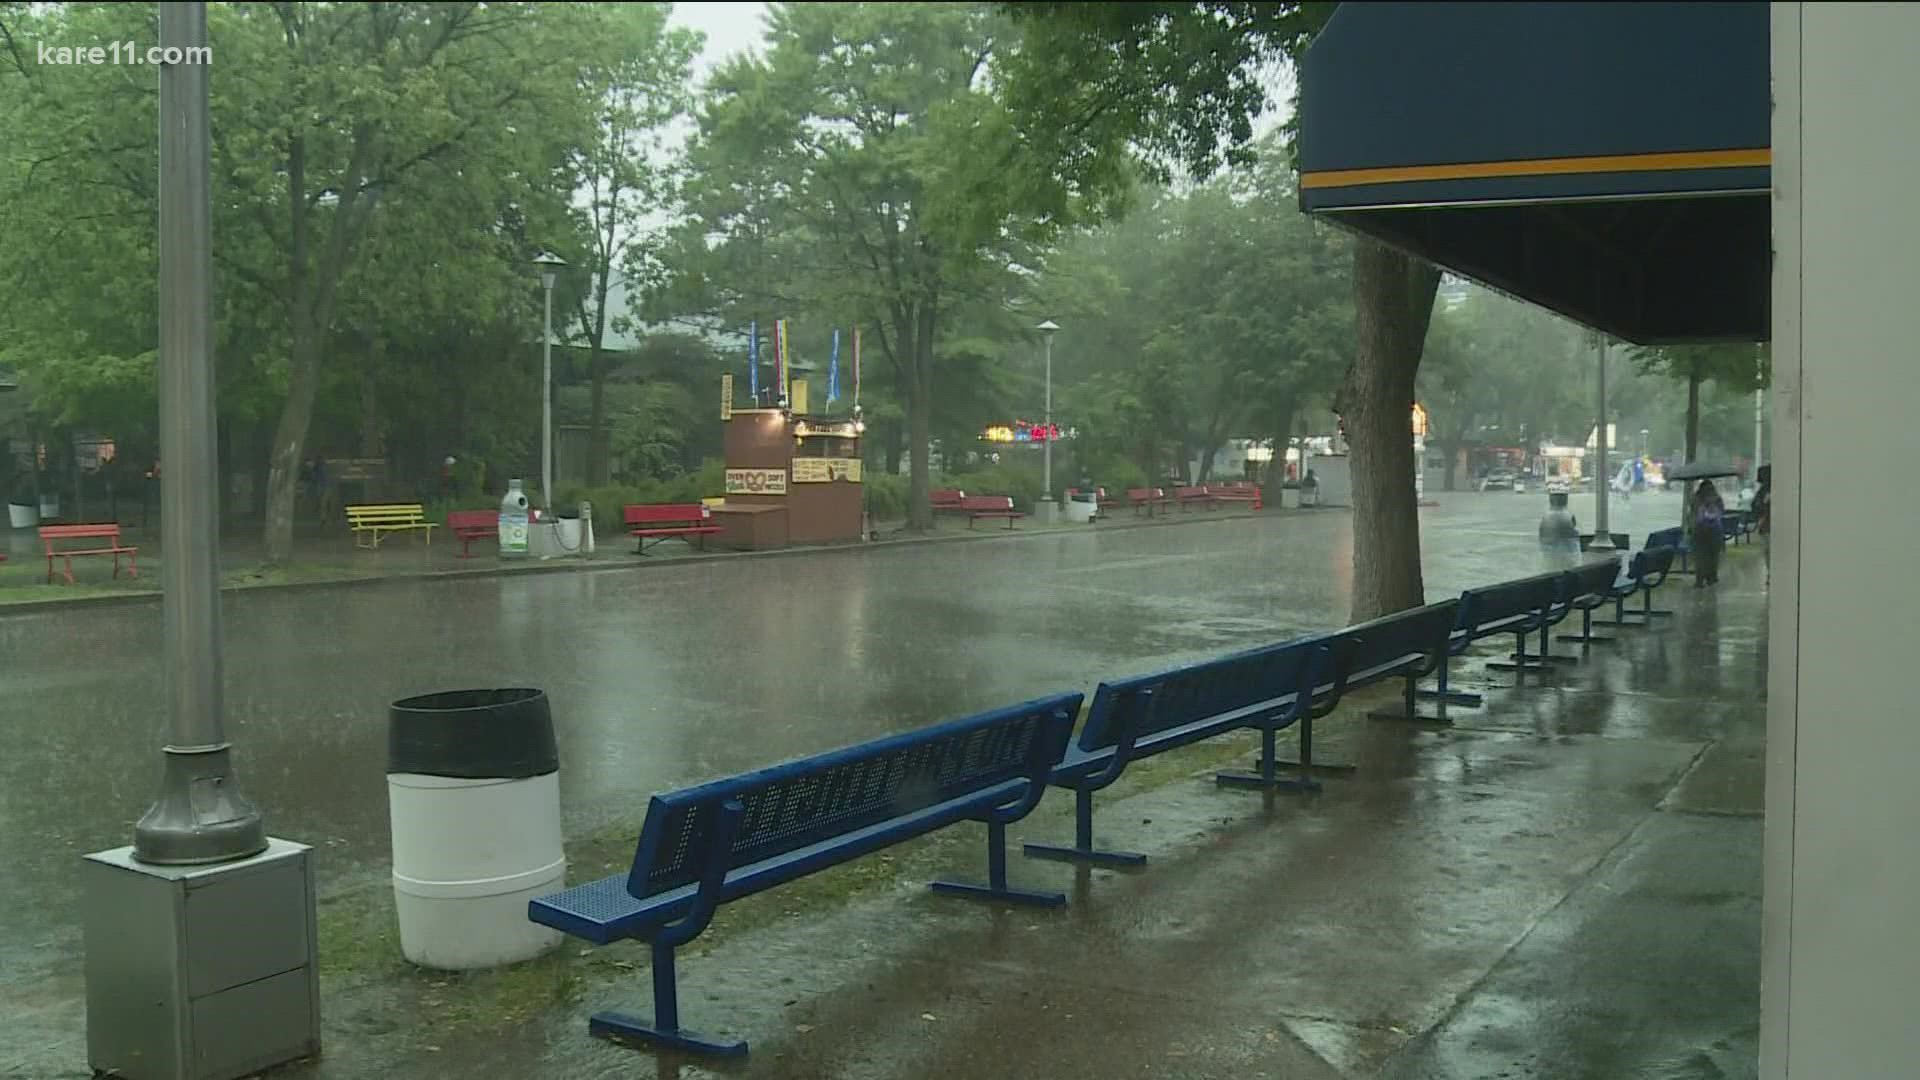 Fair-goers were met with rain and subsequent closures on the first day of the Minnesota State Fair.